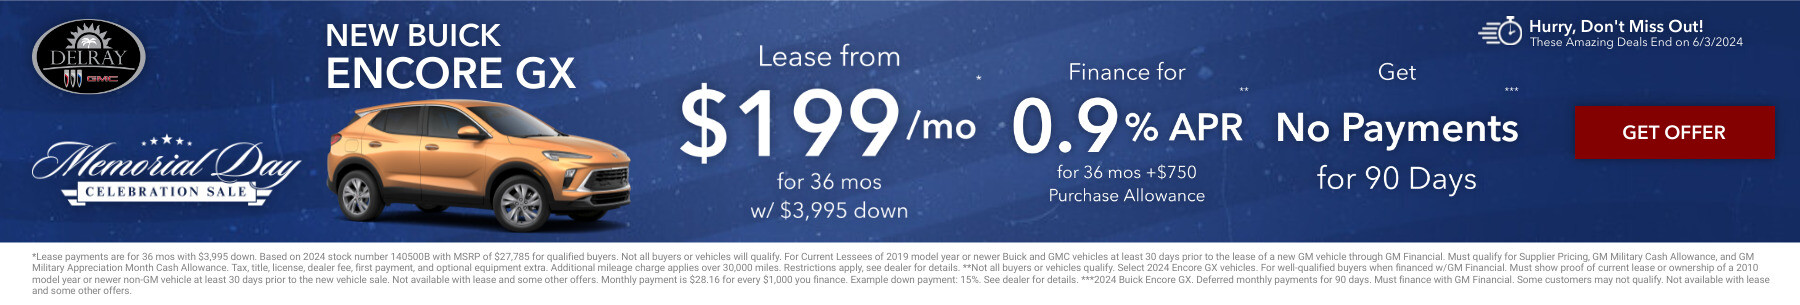 New Buick Encore GX Current Deals and Offers in Delray Beach, FL